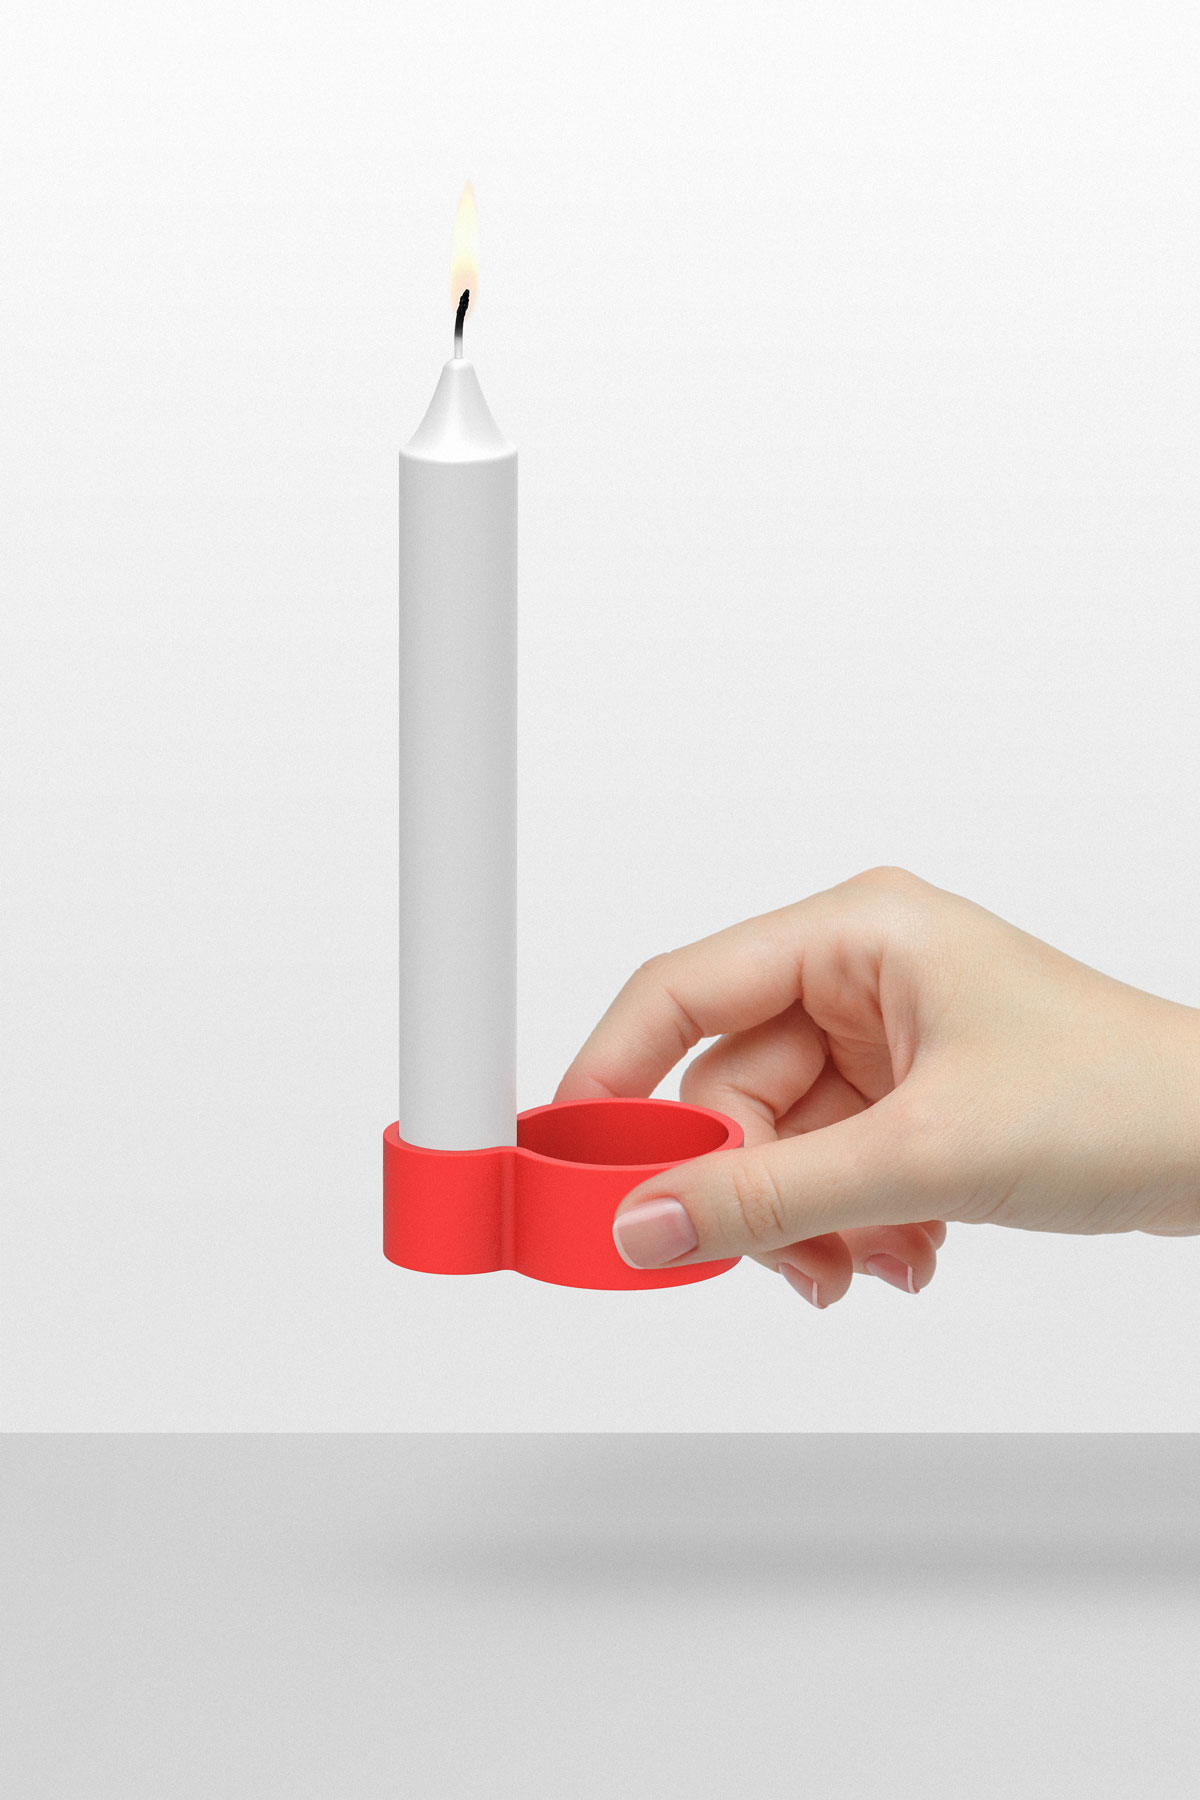 LOOP Candle Holder by Quentin de Coster